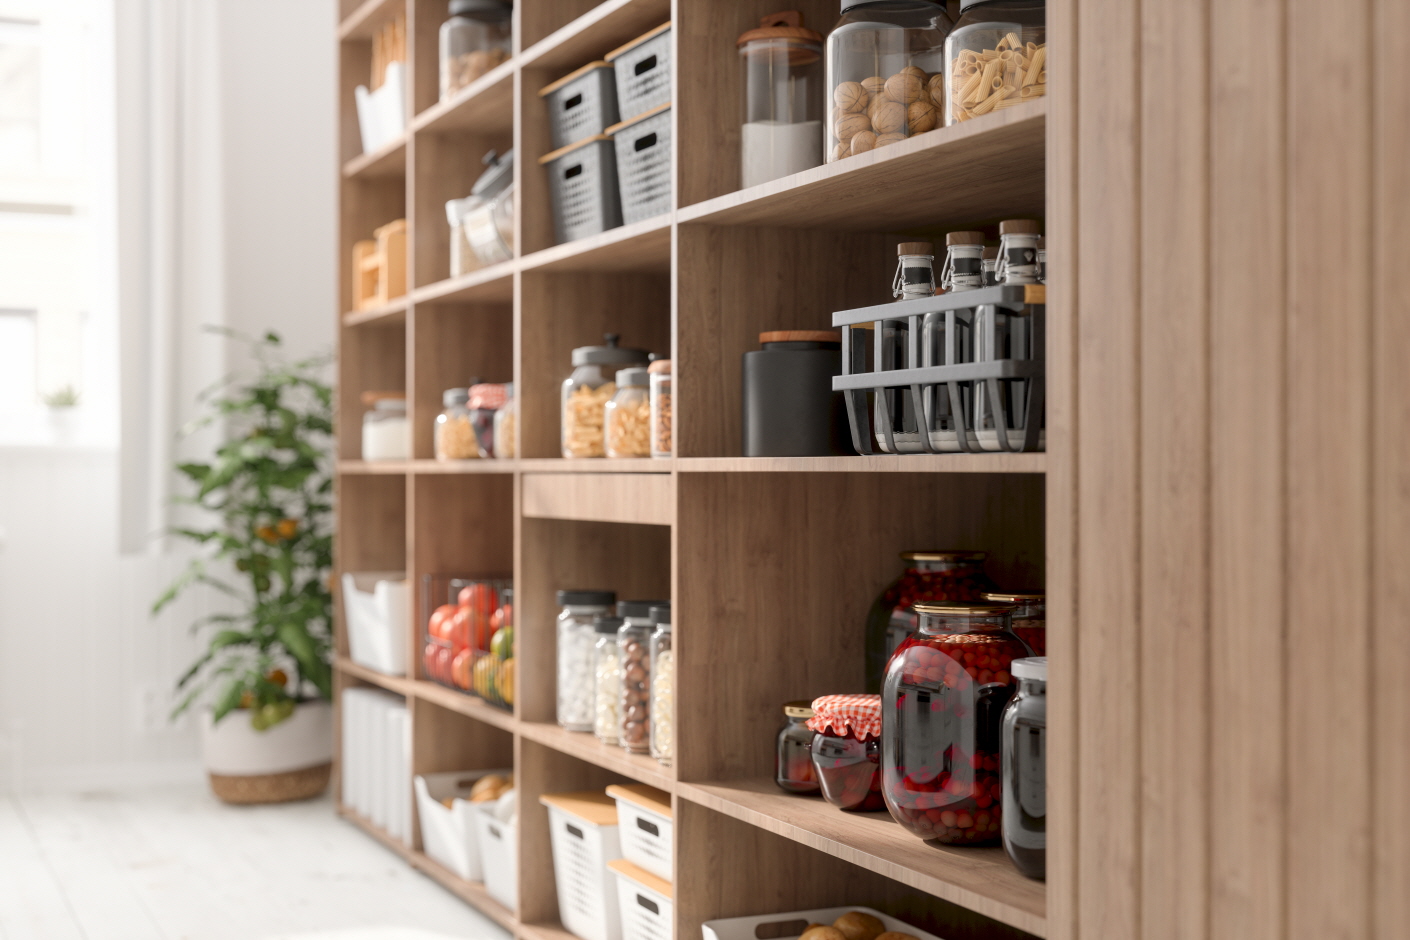 In small kitchens, use open shelves and glass jars for storage and decor.